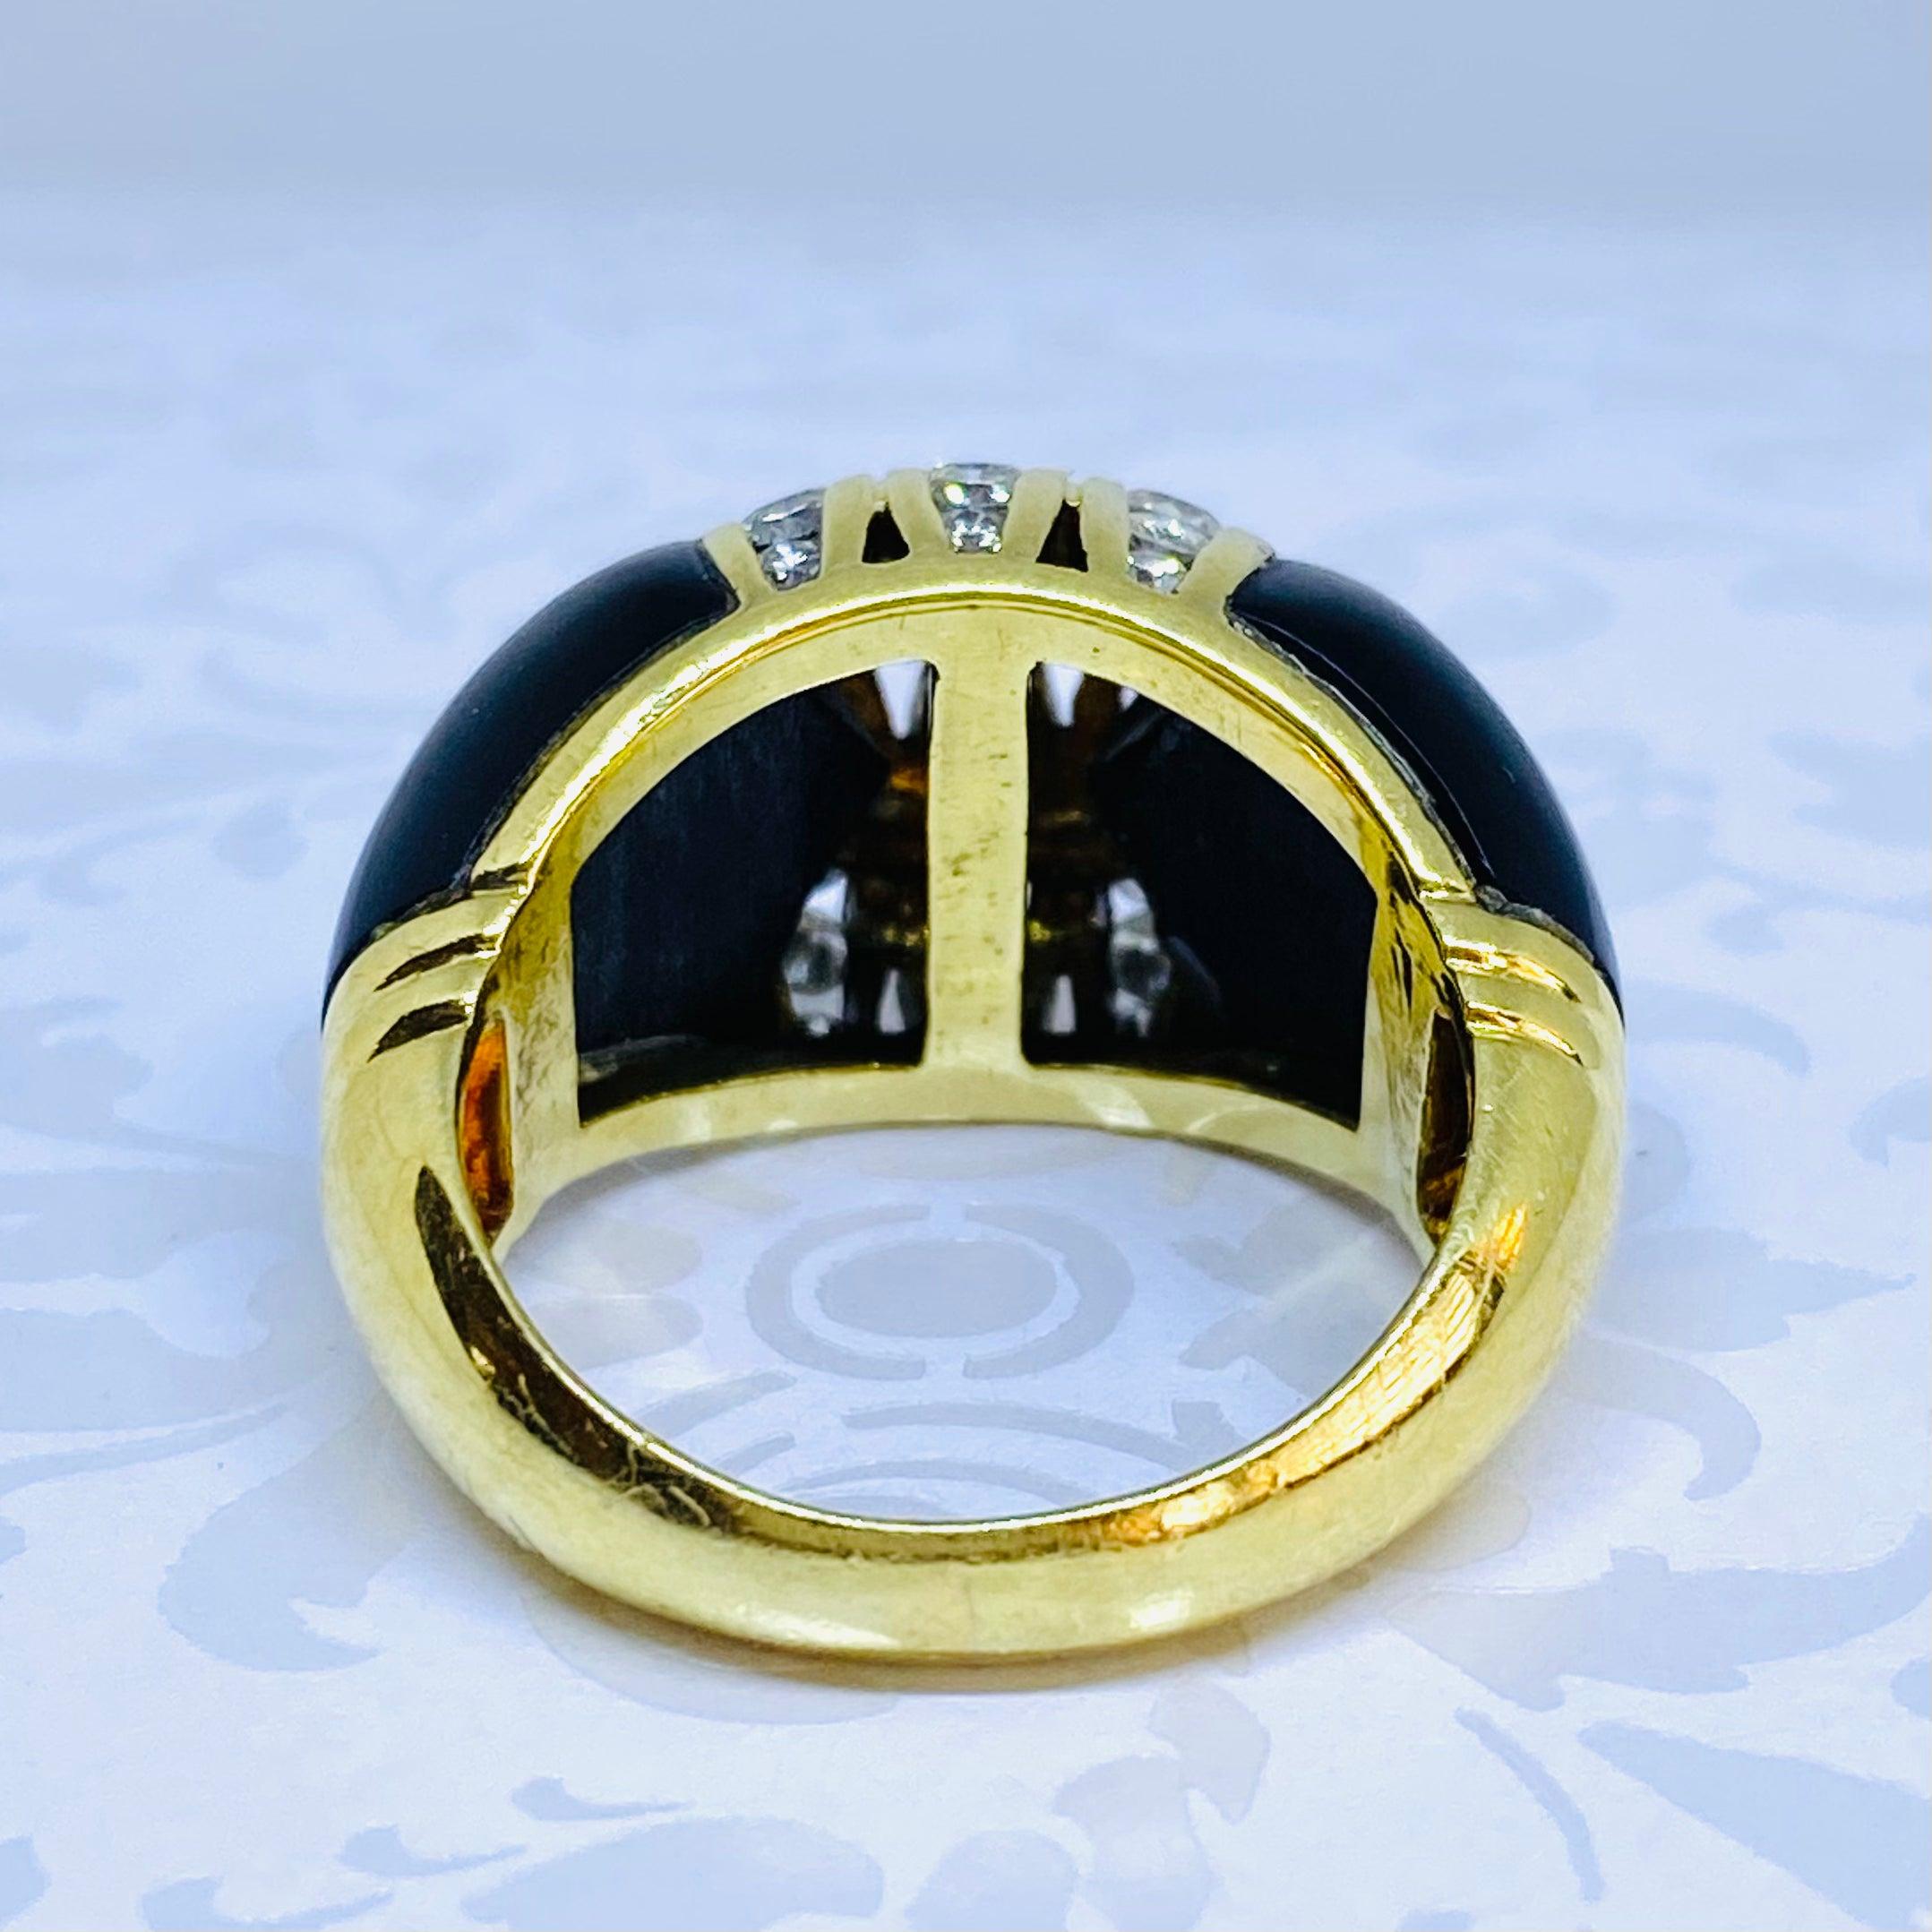 Vintage 18K Yellow Gold Black Onyx and Diamond Dome Ring In Good Condition For Sale In Henderson, NV